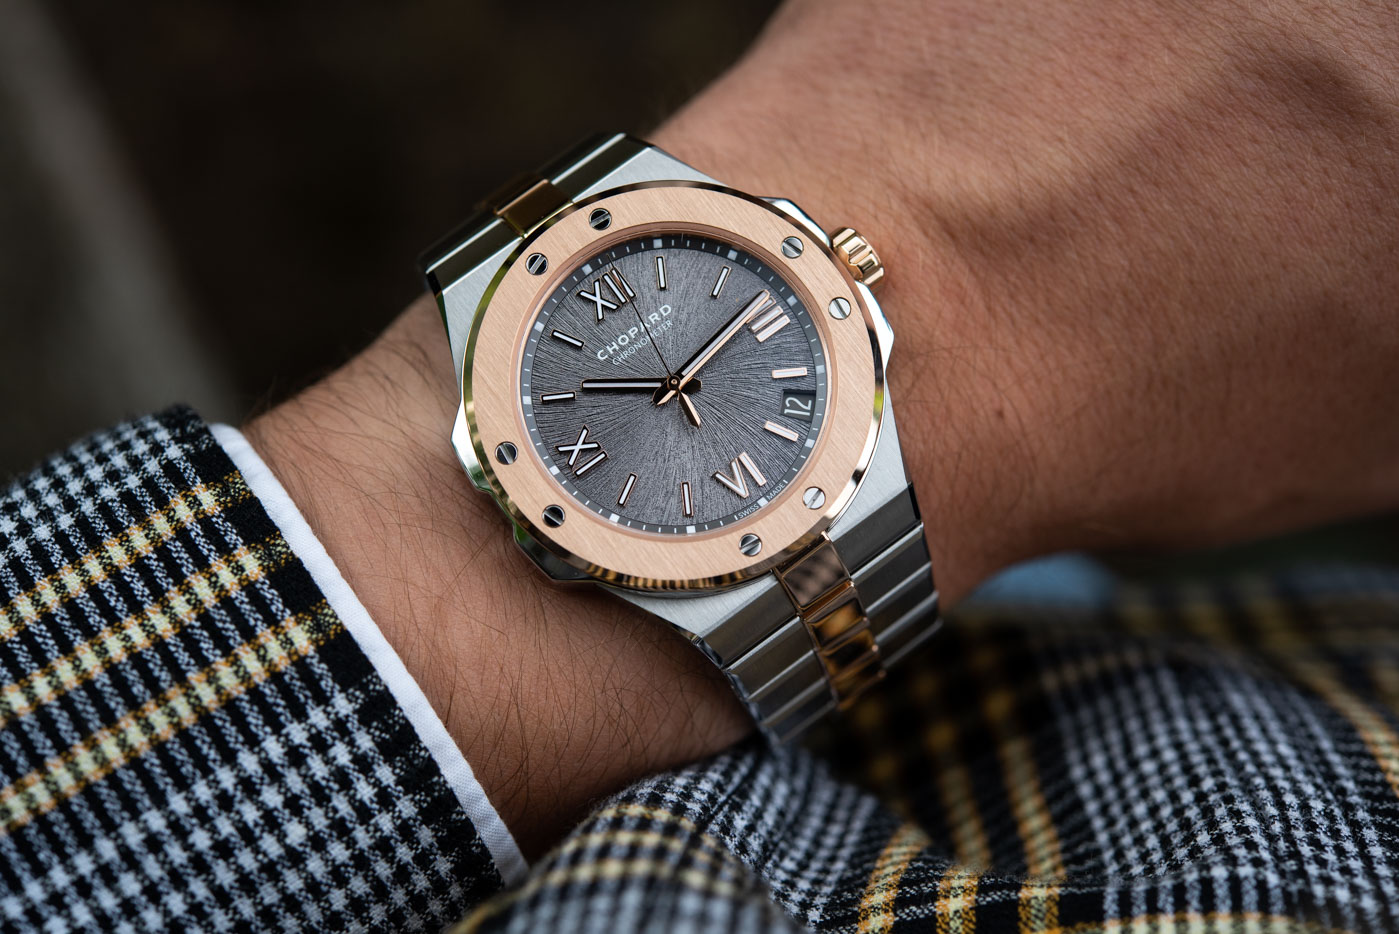 Hands-On: Chopard Alpine Eagle 41 XPS And Cadence 8HF Watches